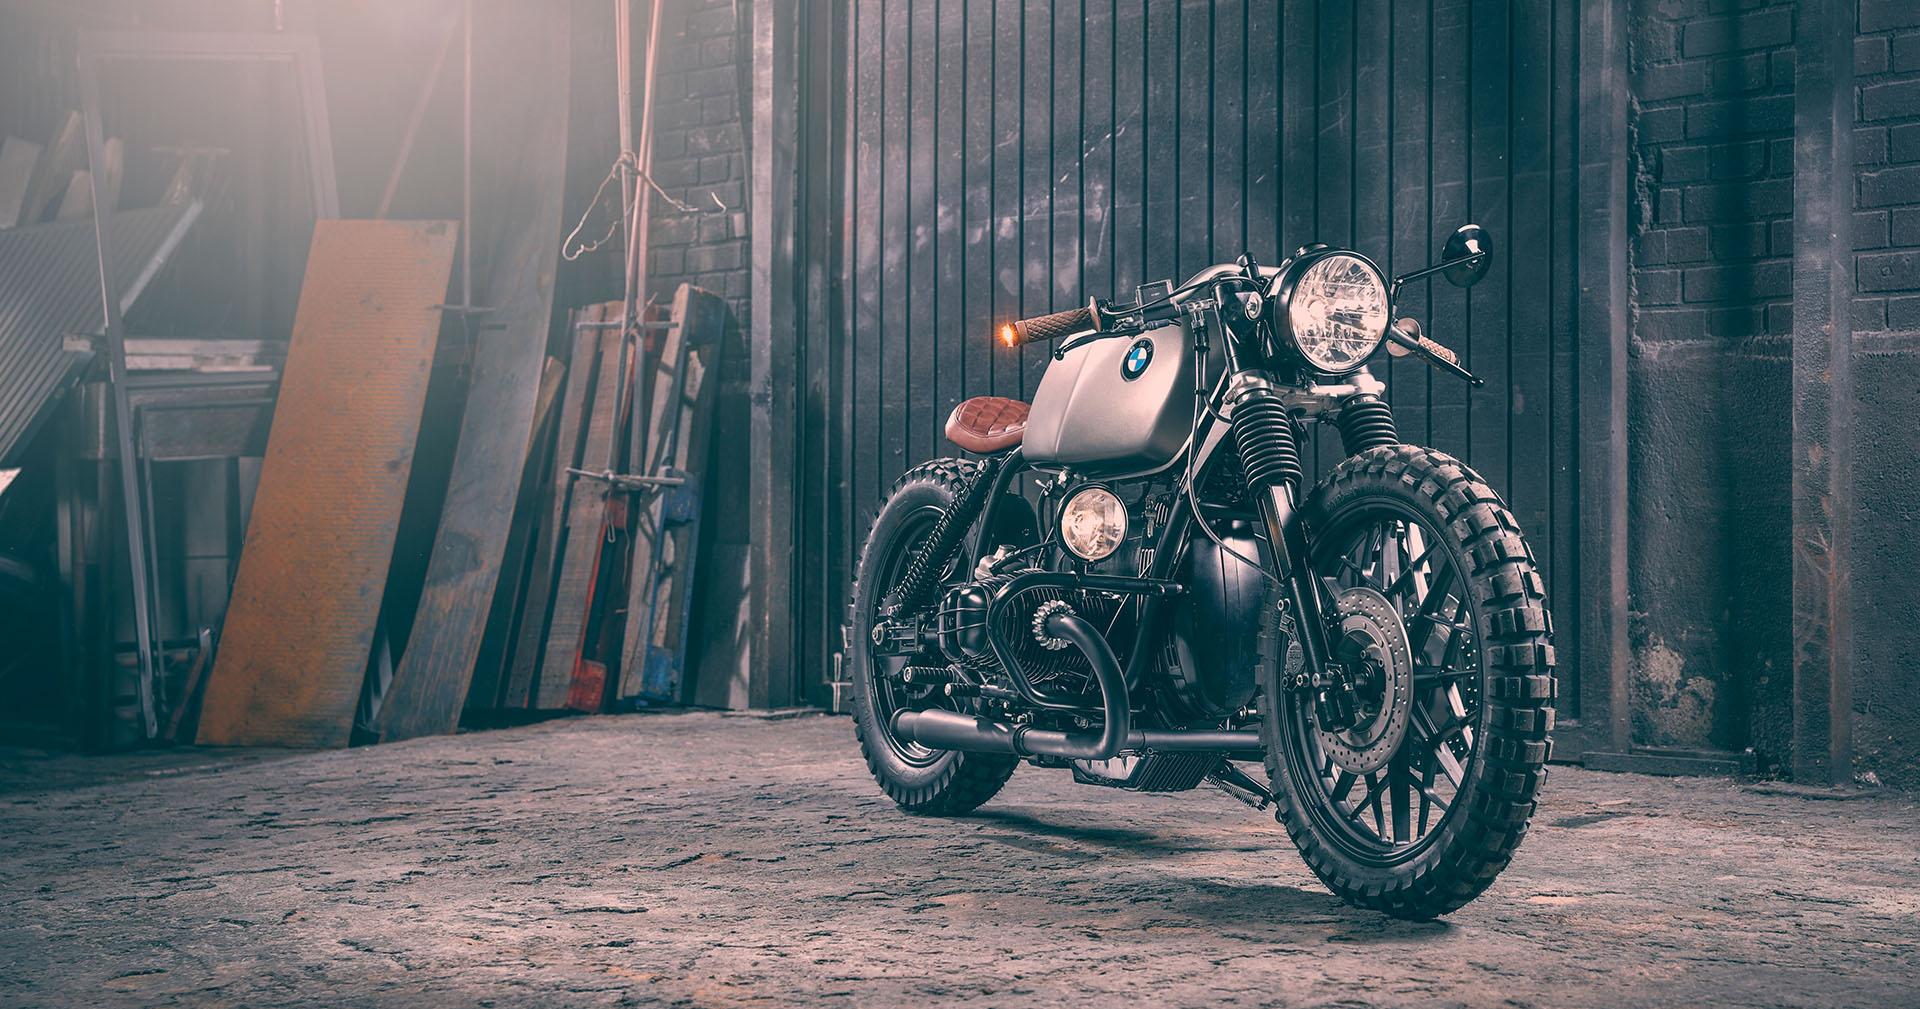 Crd102 Cafe Racer Bmw R100 By Dreams Madrid